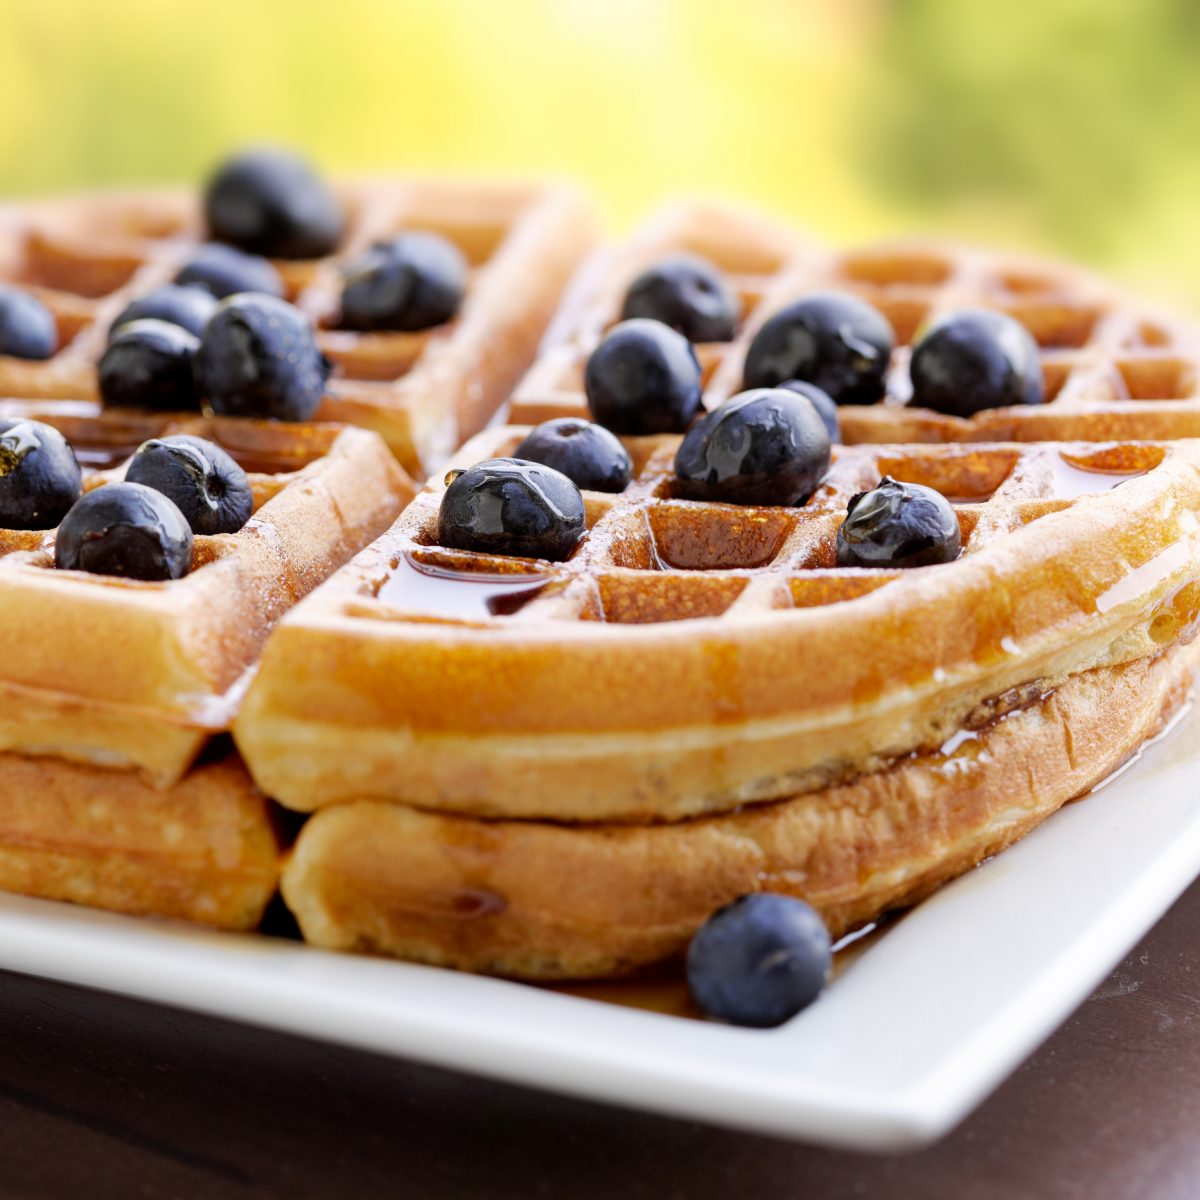 Banana waffles with blueberries.